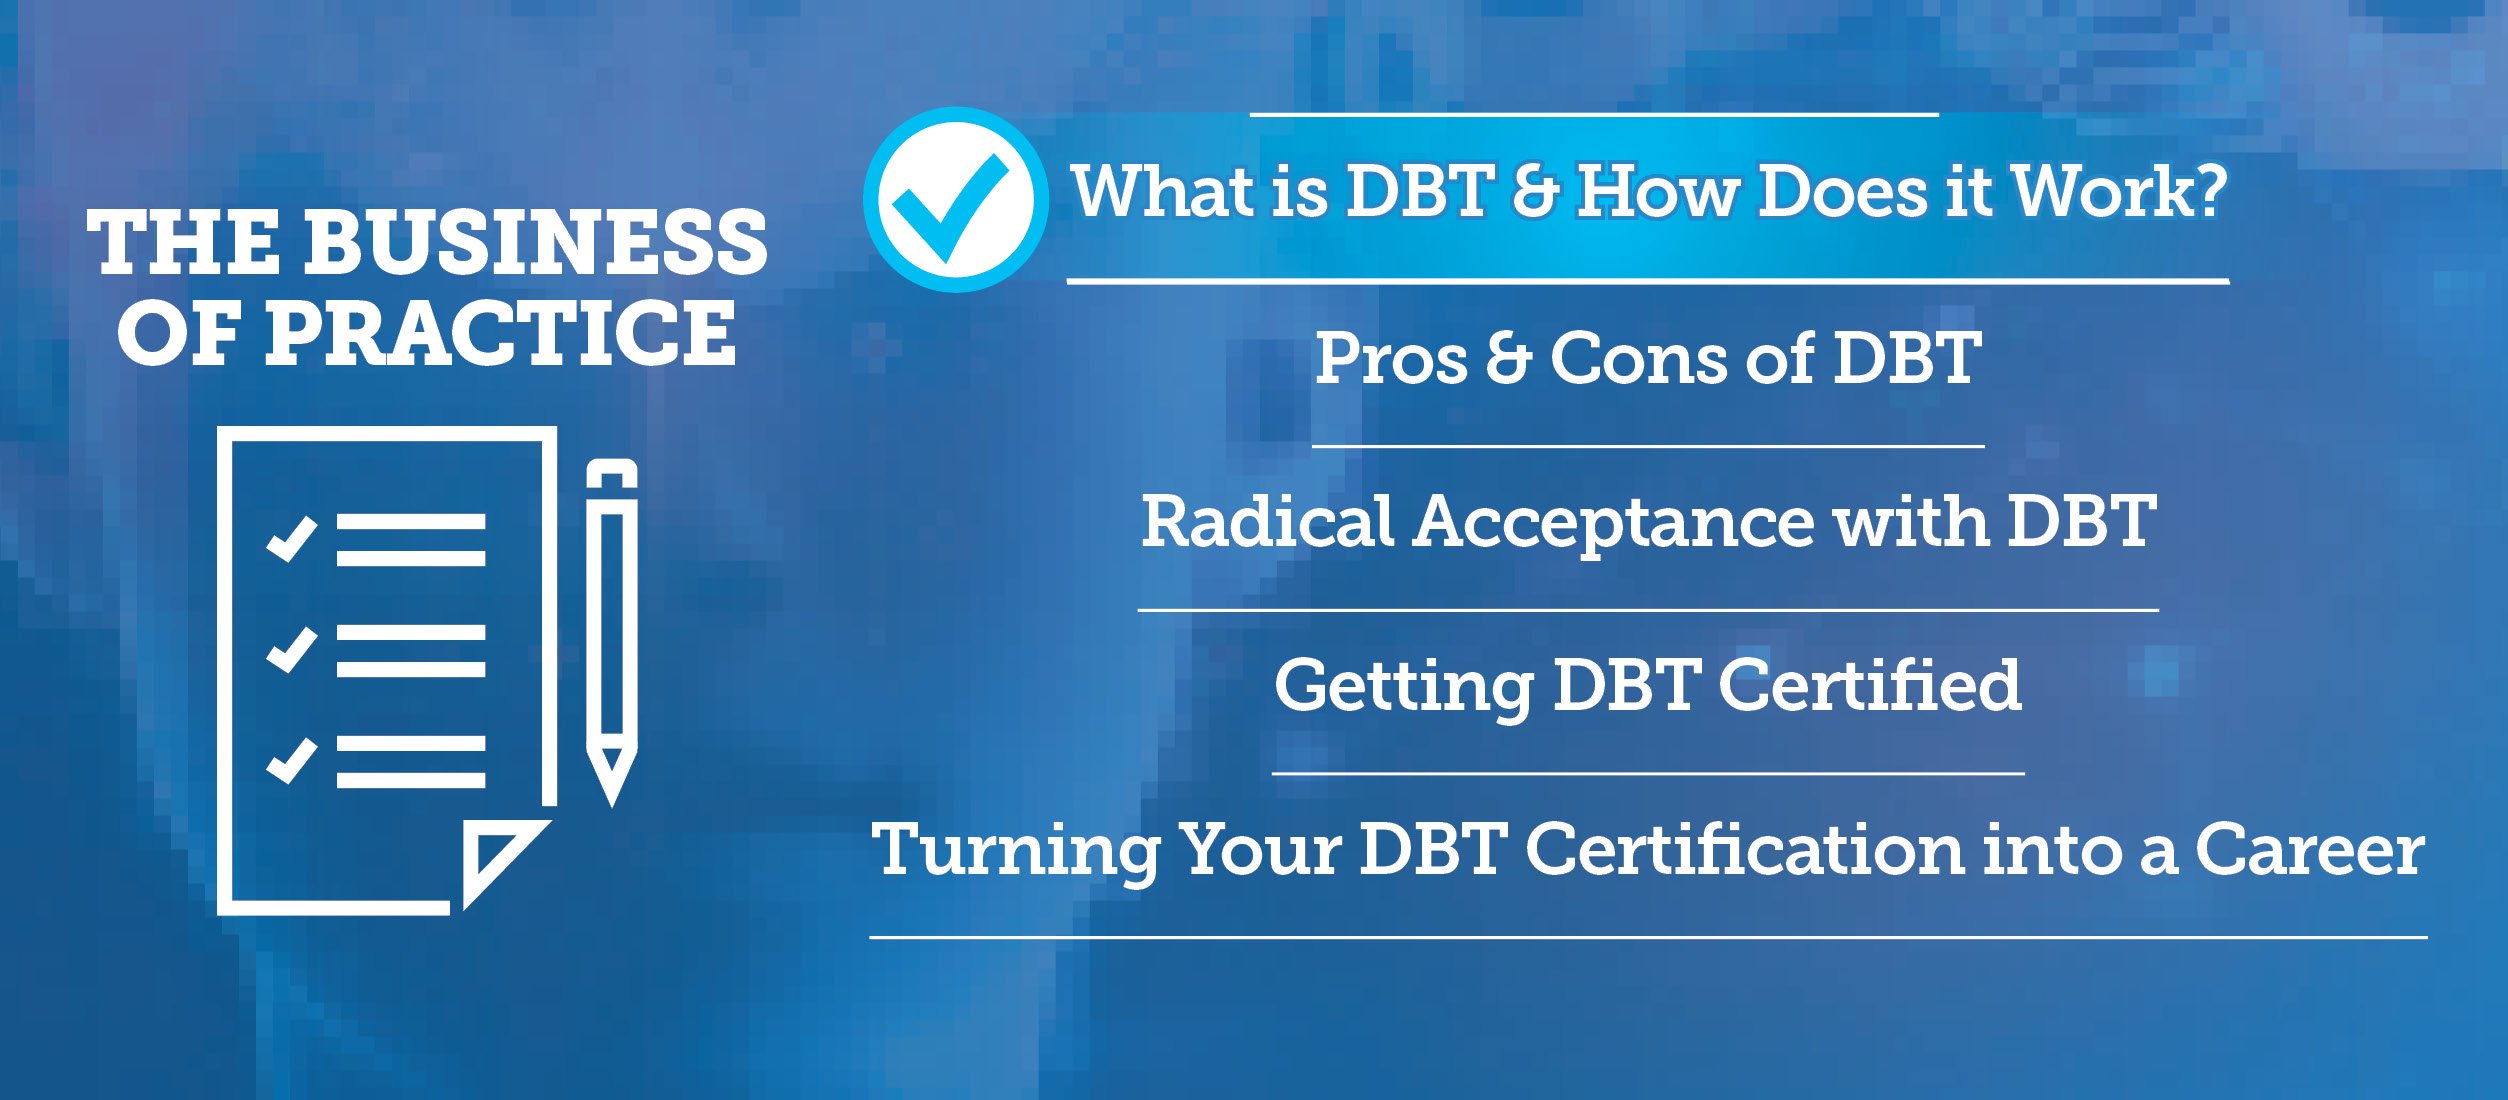 What is DBT & How Does it Work?